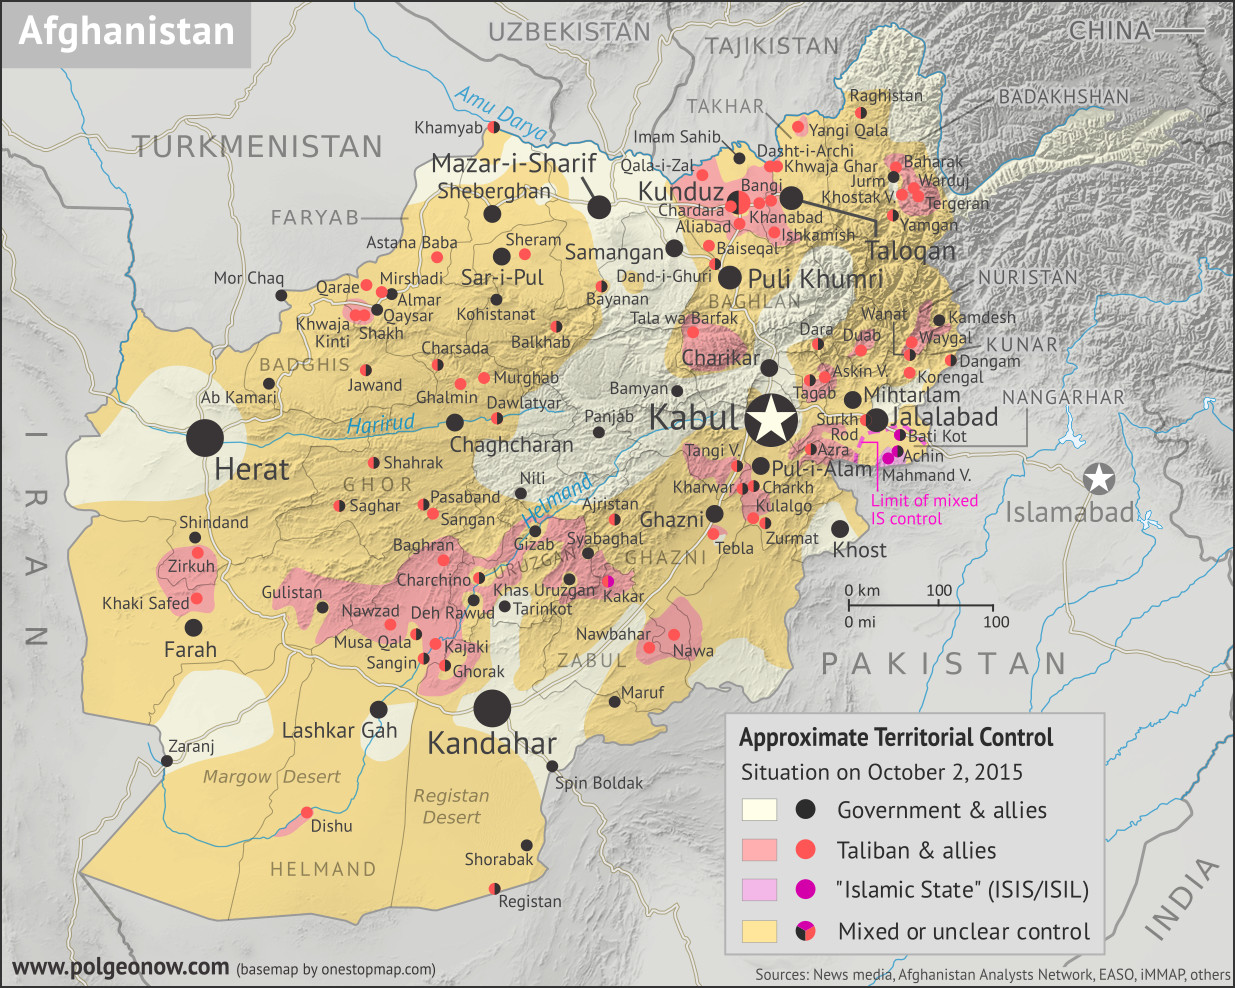 Where in Afghanistan is the war? Map of Taliban control in Afghanistan in October 2015, during the Taliban's takeover of Kunduz city and at the height of so-called Islamic State (ISIS/ISIL) control in Nangharhar province. Also marks areas of government control and unclear or mixed control. Includes all of Afghanistan's major cities, plus selected towns, including many sites of Taliban control. Colorblind accessible.